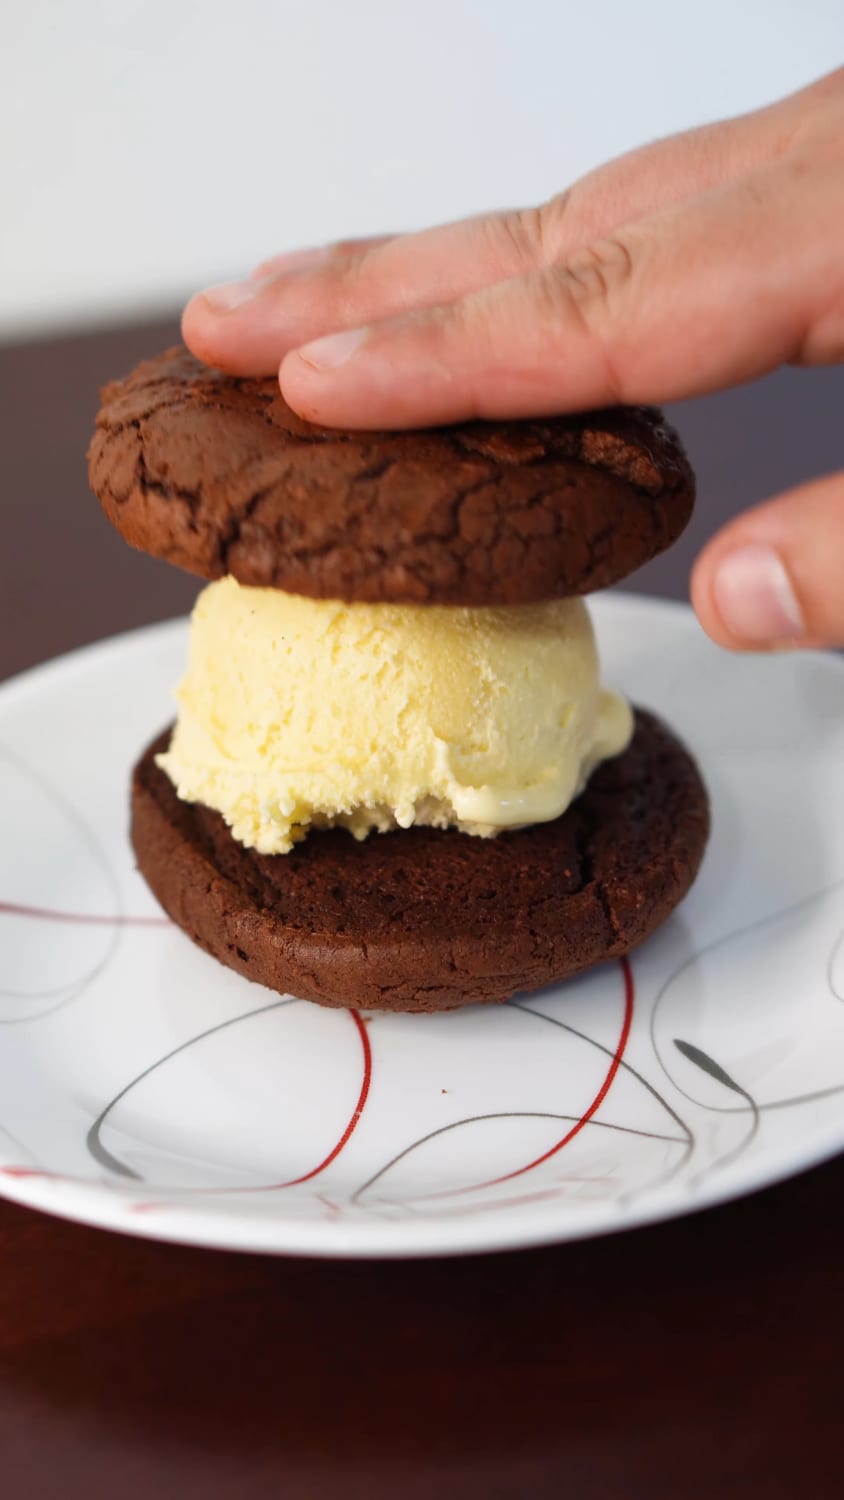 Here's a video I made on some Homemade Vanilla Ice Cream Sandwiches!